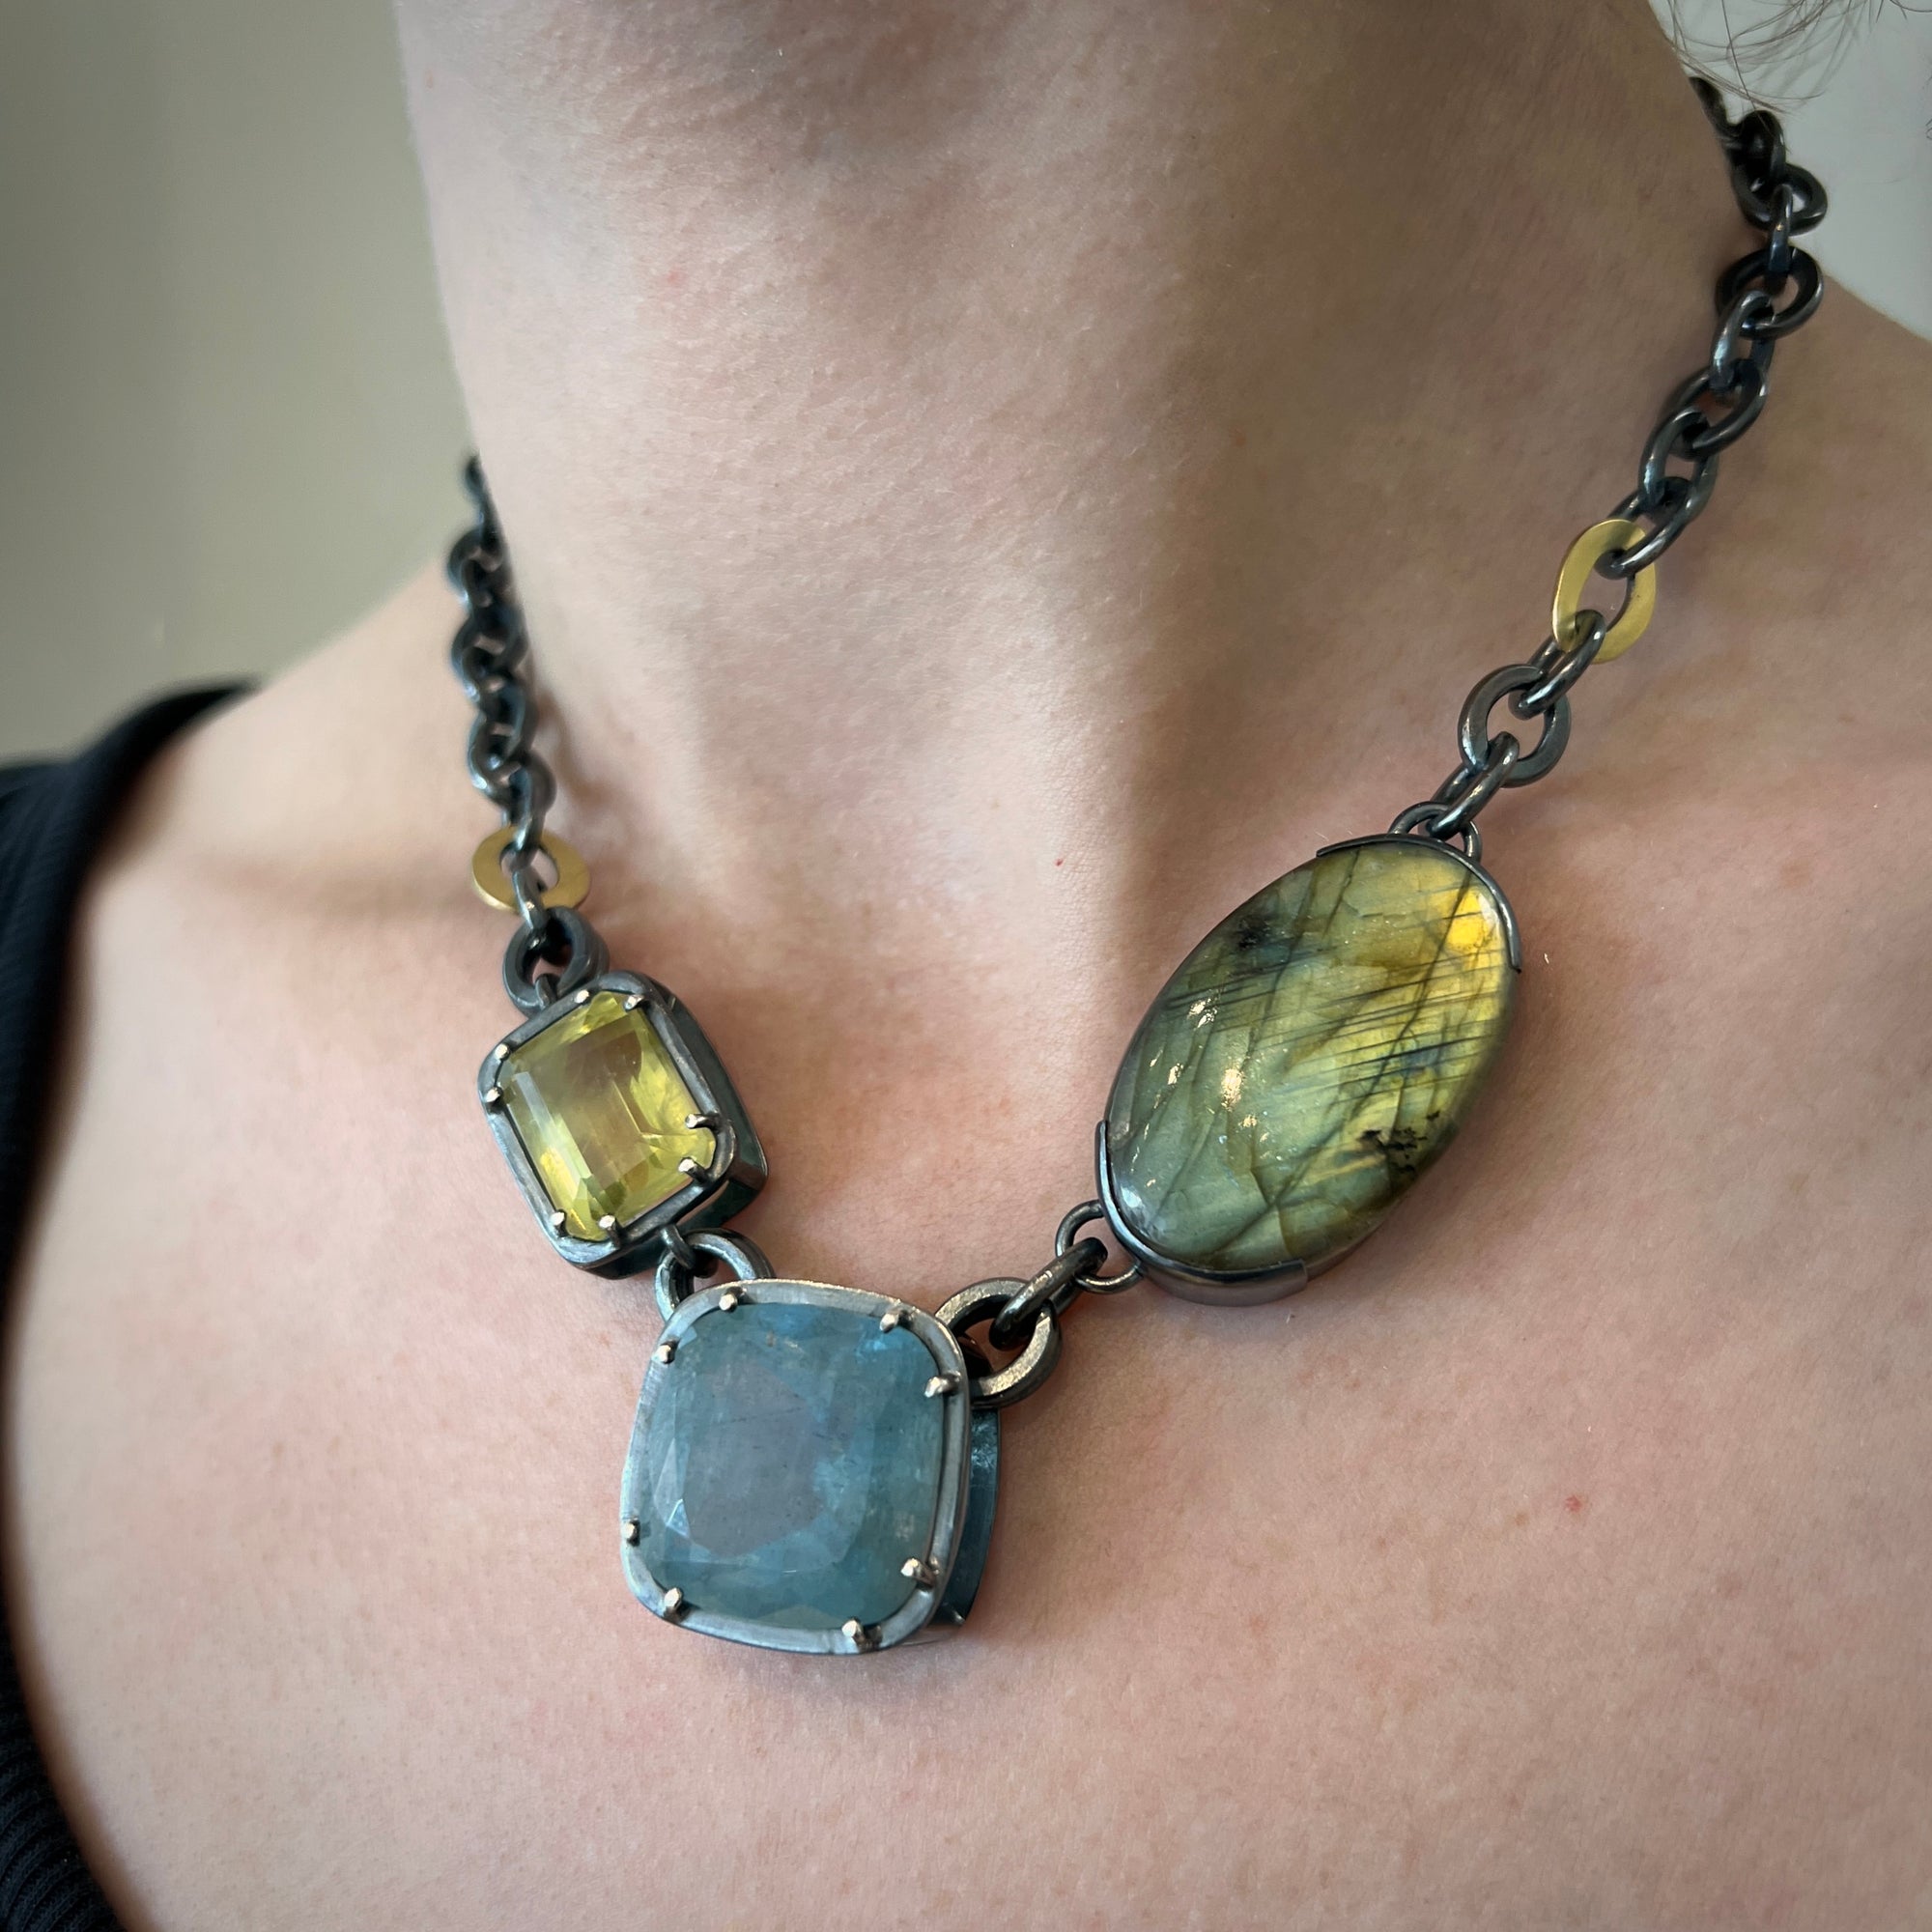 Metaphysical necklace #4 with labradorite and aquamarine in sterling silver and 18K yellow gold